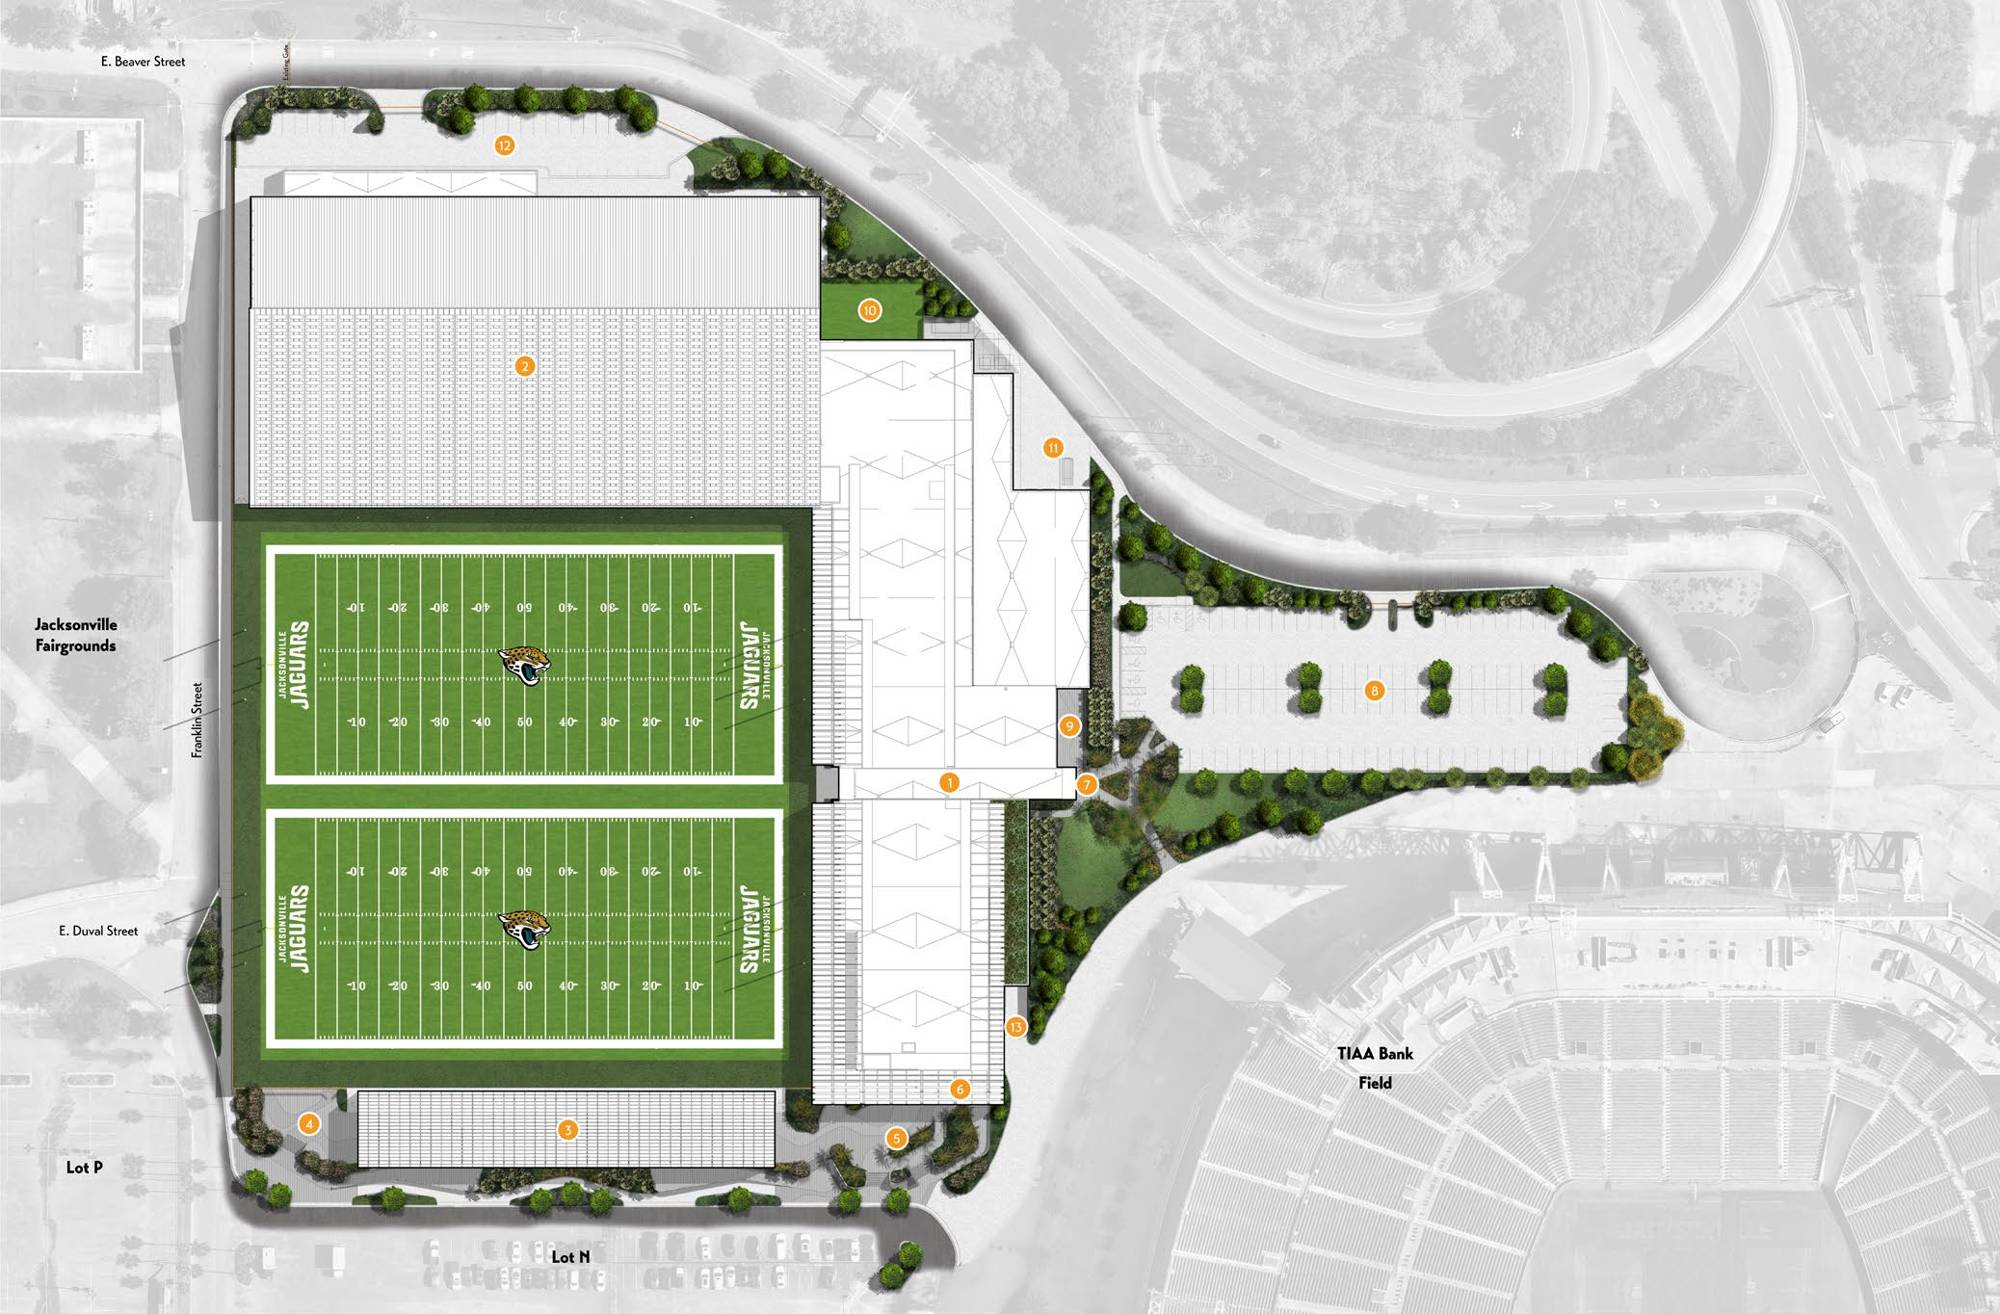 The Jaguars will move team offices, an equipment room, and weight training and medical facilities from the stadium to the city-owned performance center.